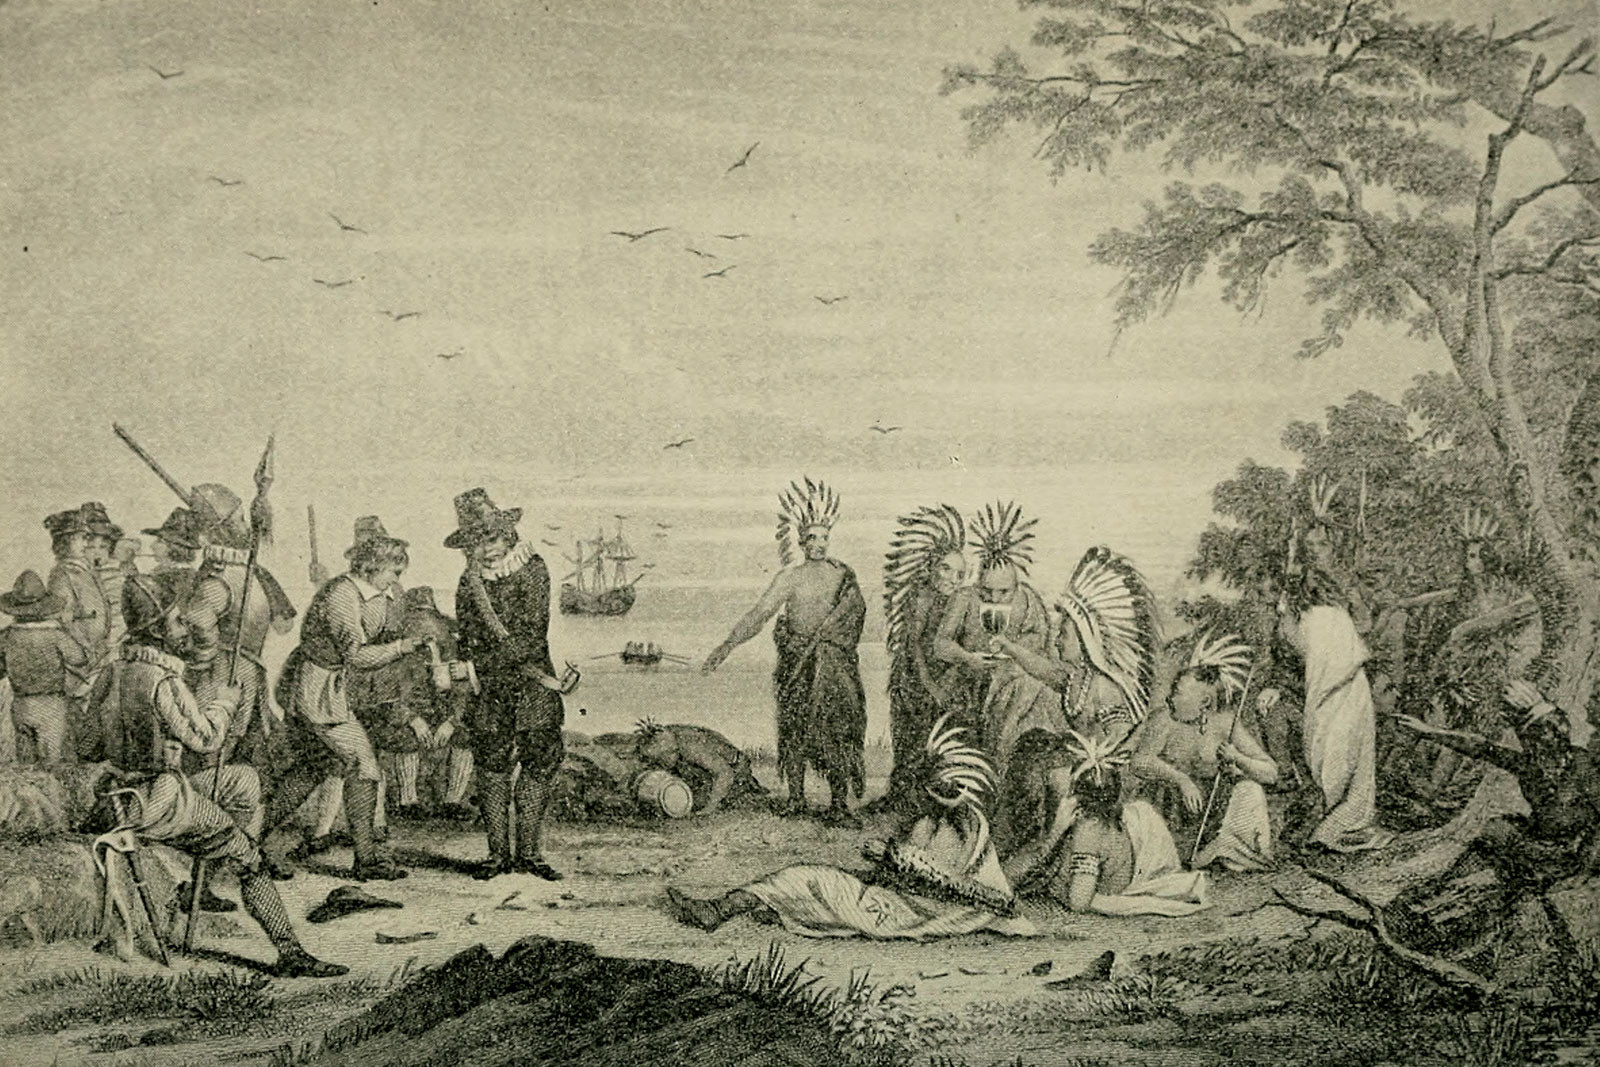 Massasoit meets with the Wampanoags in this etching from the 1906 book, "Lives of Famous Indian Chiefs" by Norman Wood.